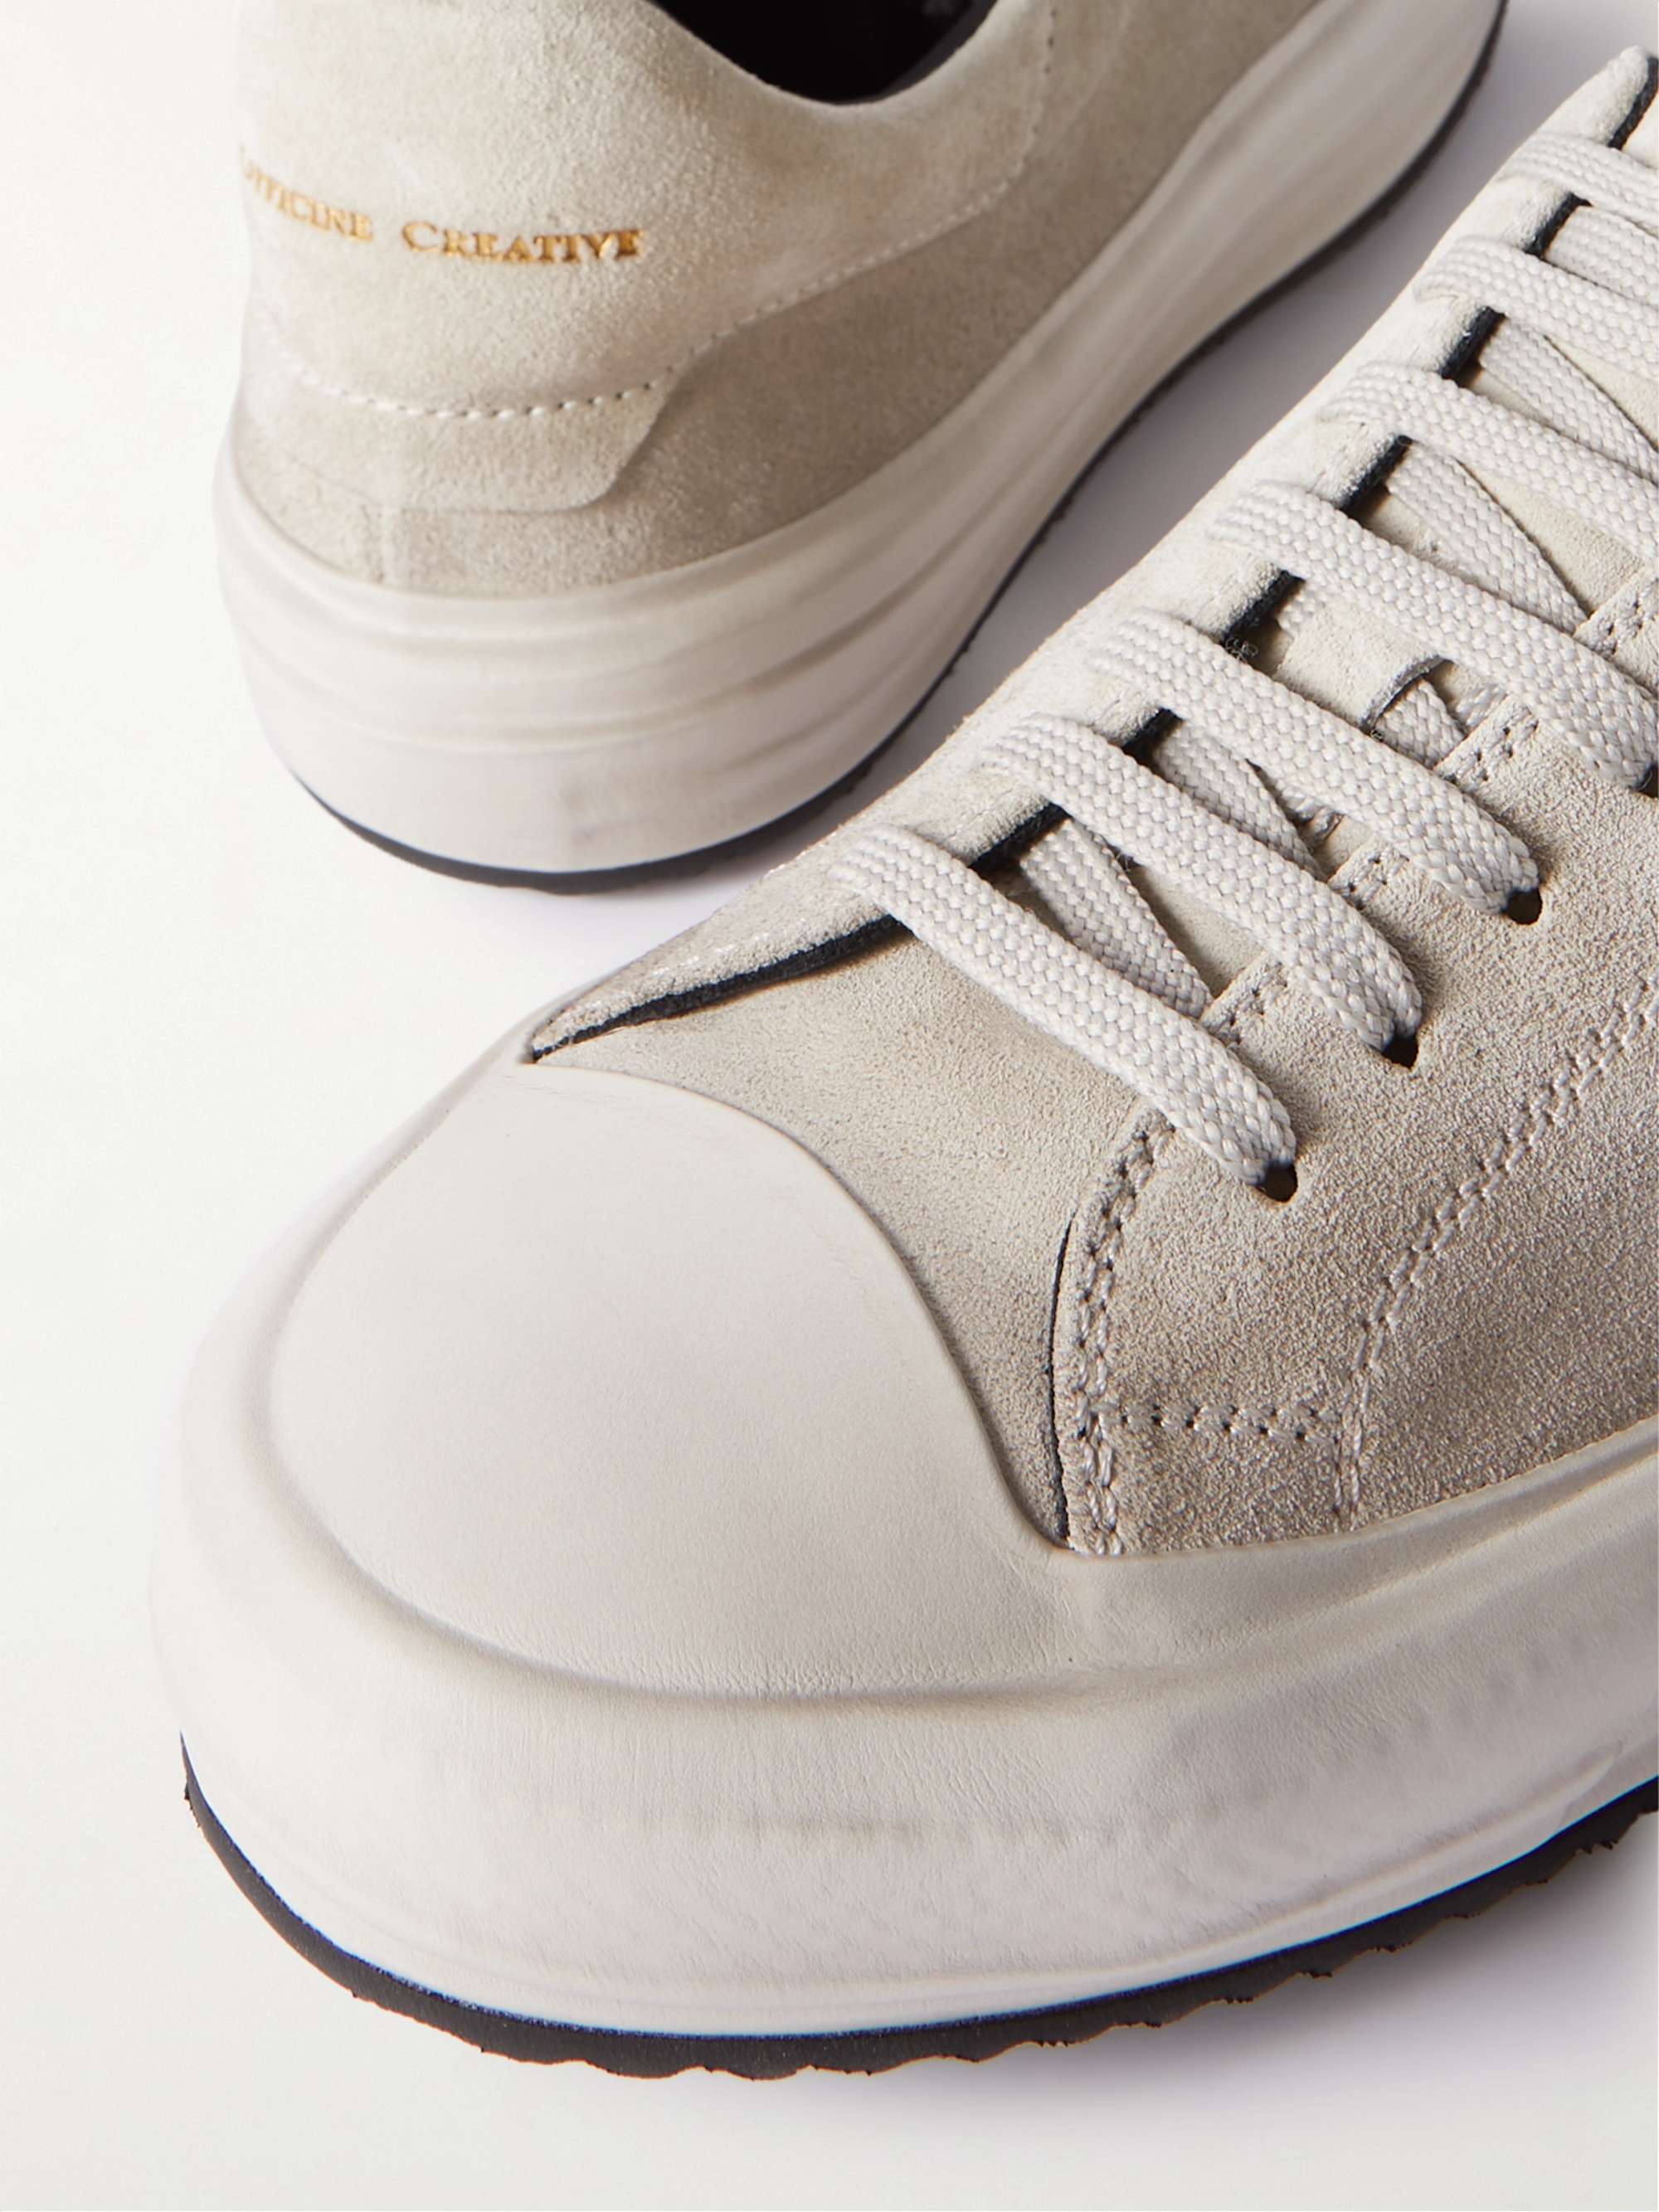 OFFICINE CREATIVE Mes Suede Sneakers